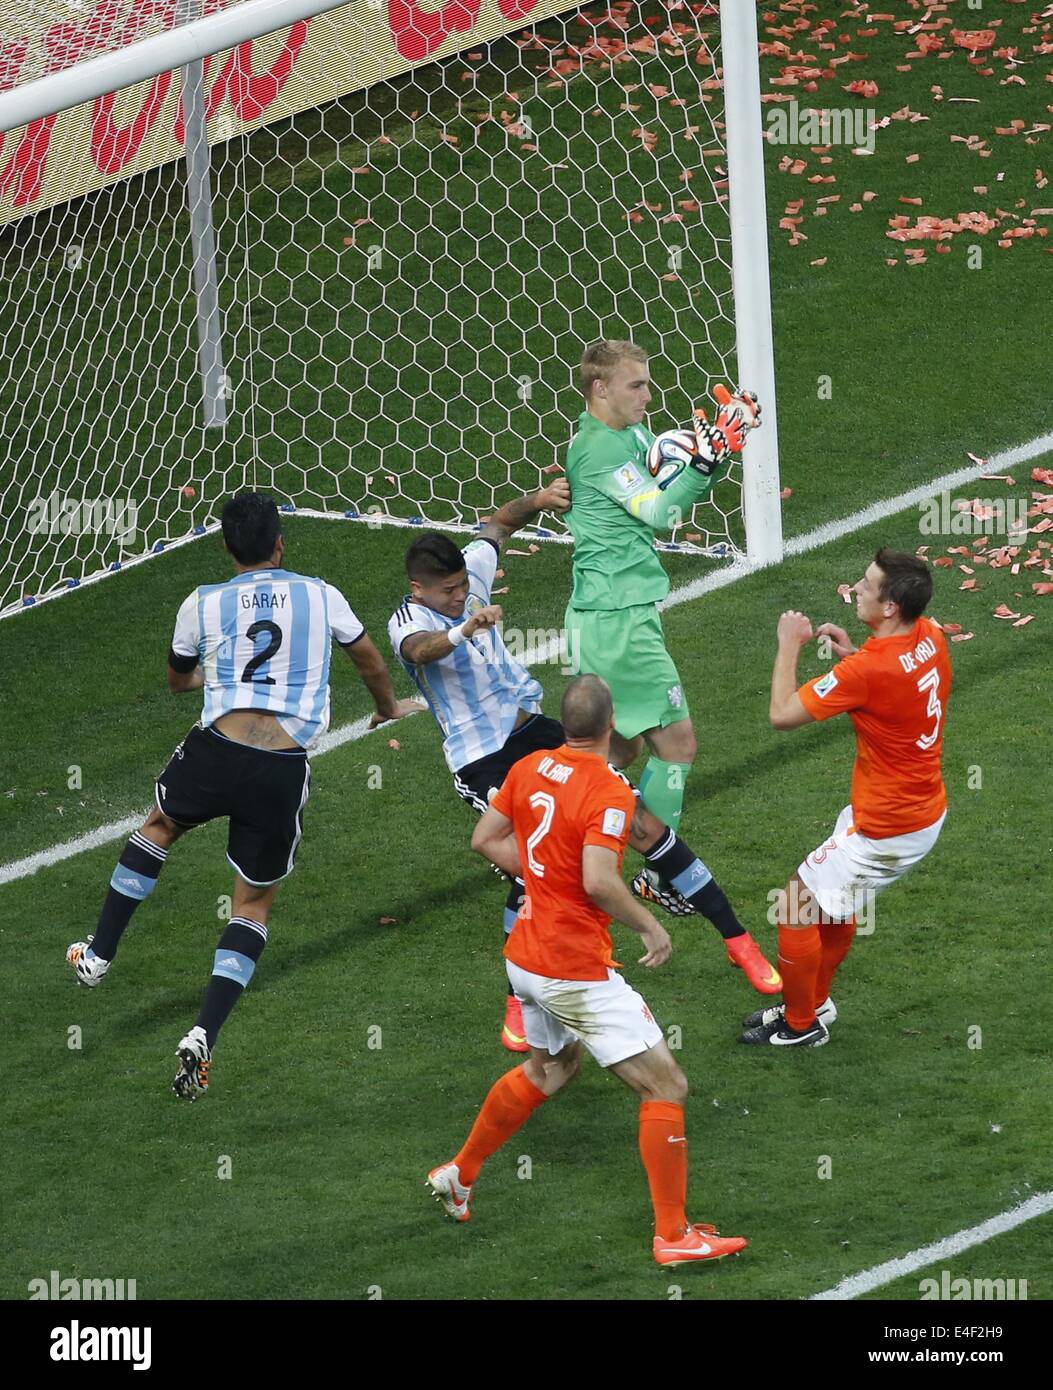 Sao Paulo, Brazil. 9th July, 2014. Netherlands' goalkeeper Jasper Cillessen (2nd R) holds the ball during a semifinal match between Netherlands and Argentina of 2014 FIFA World Cup at the Arena de Sao Paulo Stadium in Sao Paulo, Brazil, on July 9, 2014. Credit:  Liao Yujie/Xinhua/Alamy Live News Stock Photo